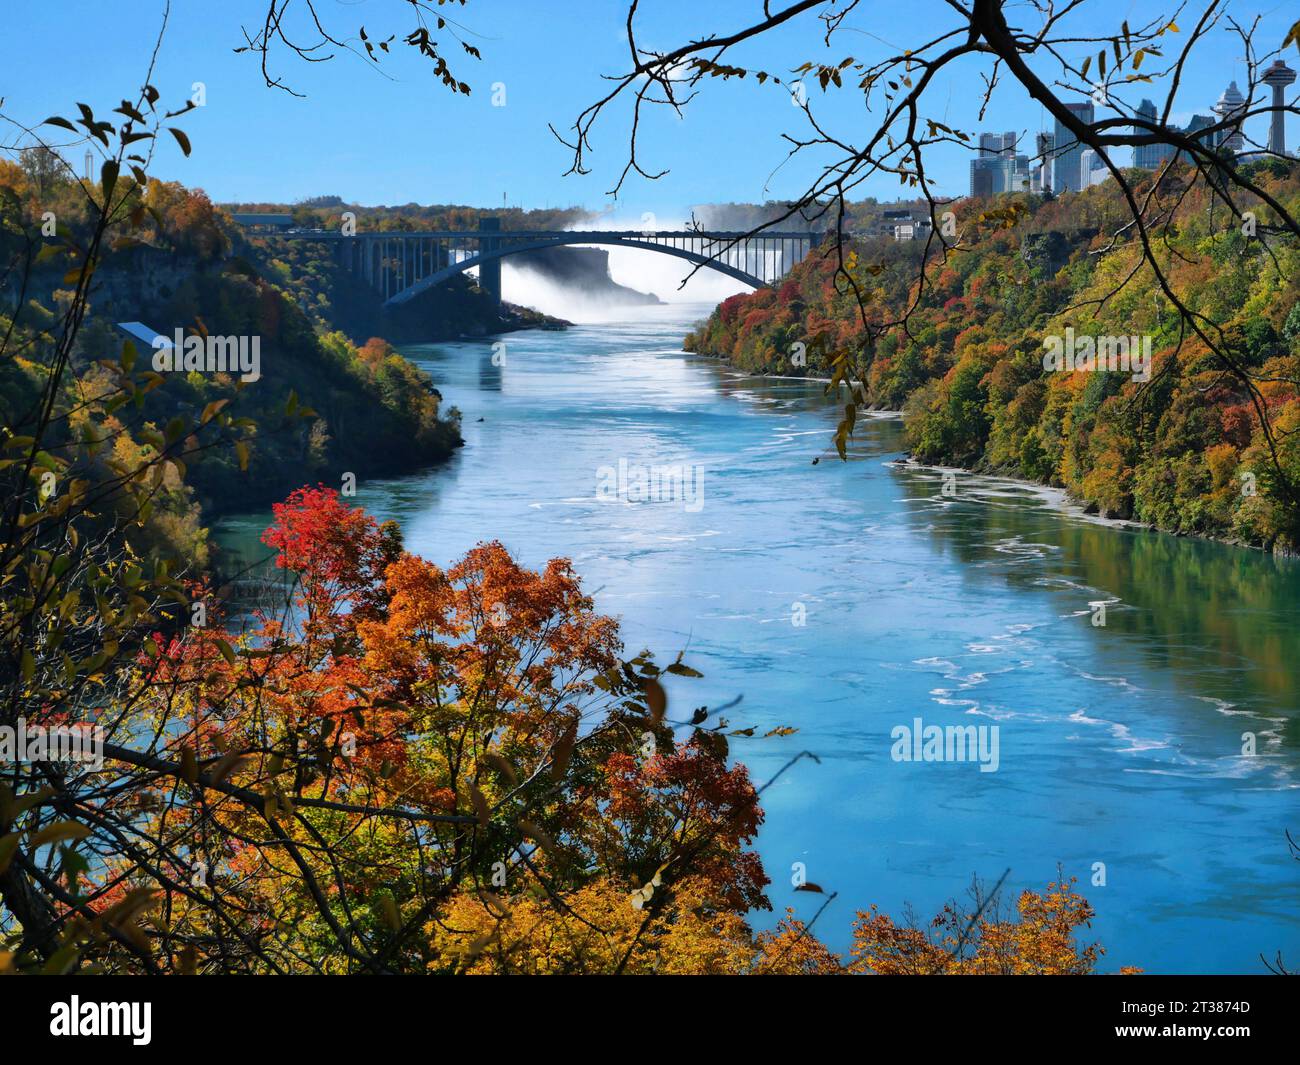 View of Niagara River Gorge from a hiking and biking trail on the American side Stock Photo